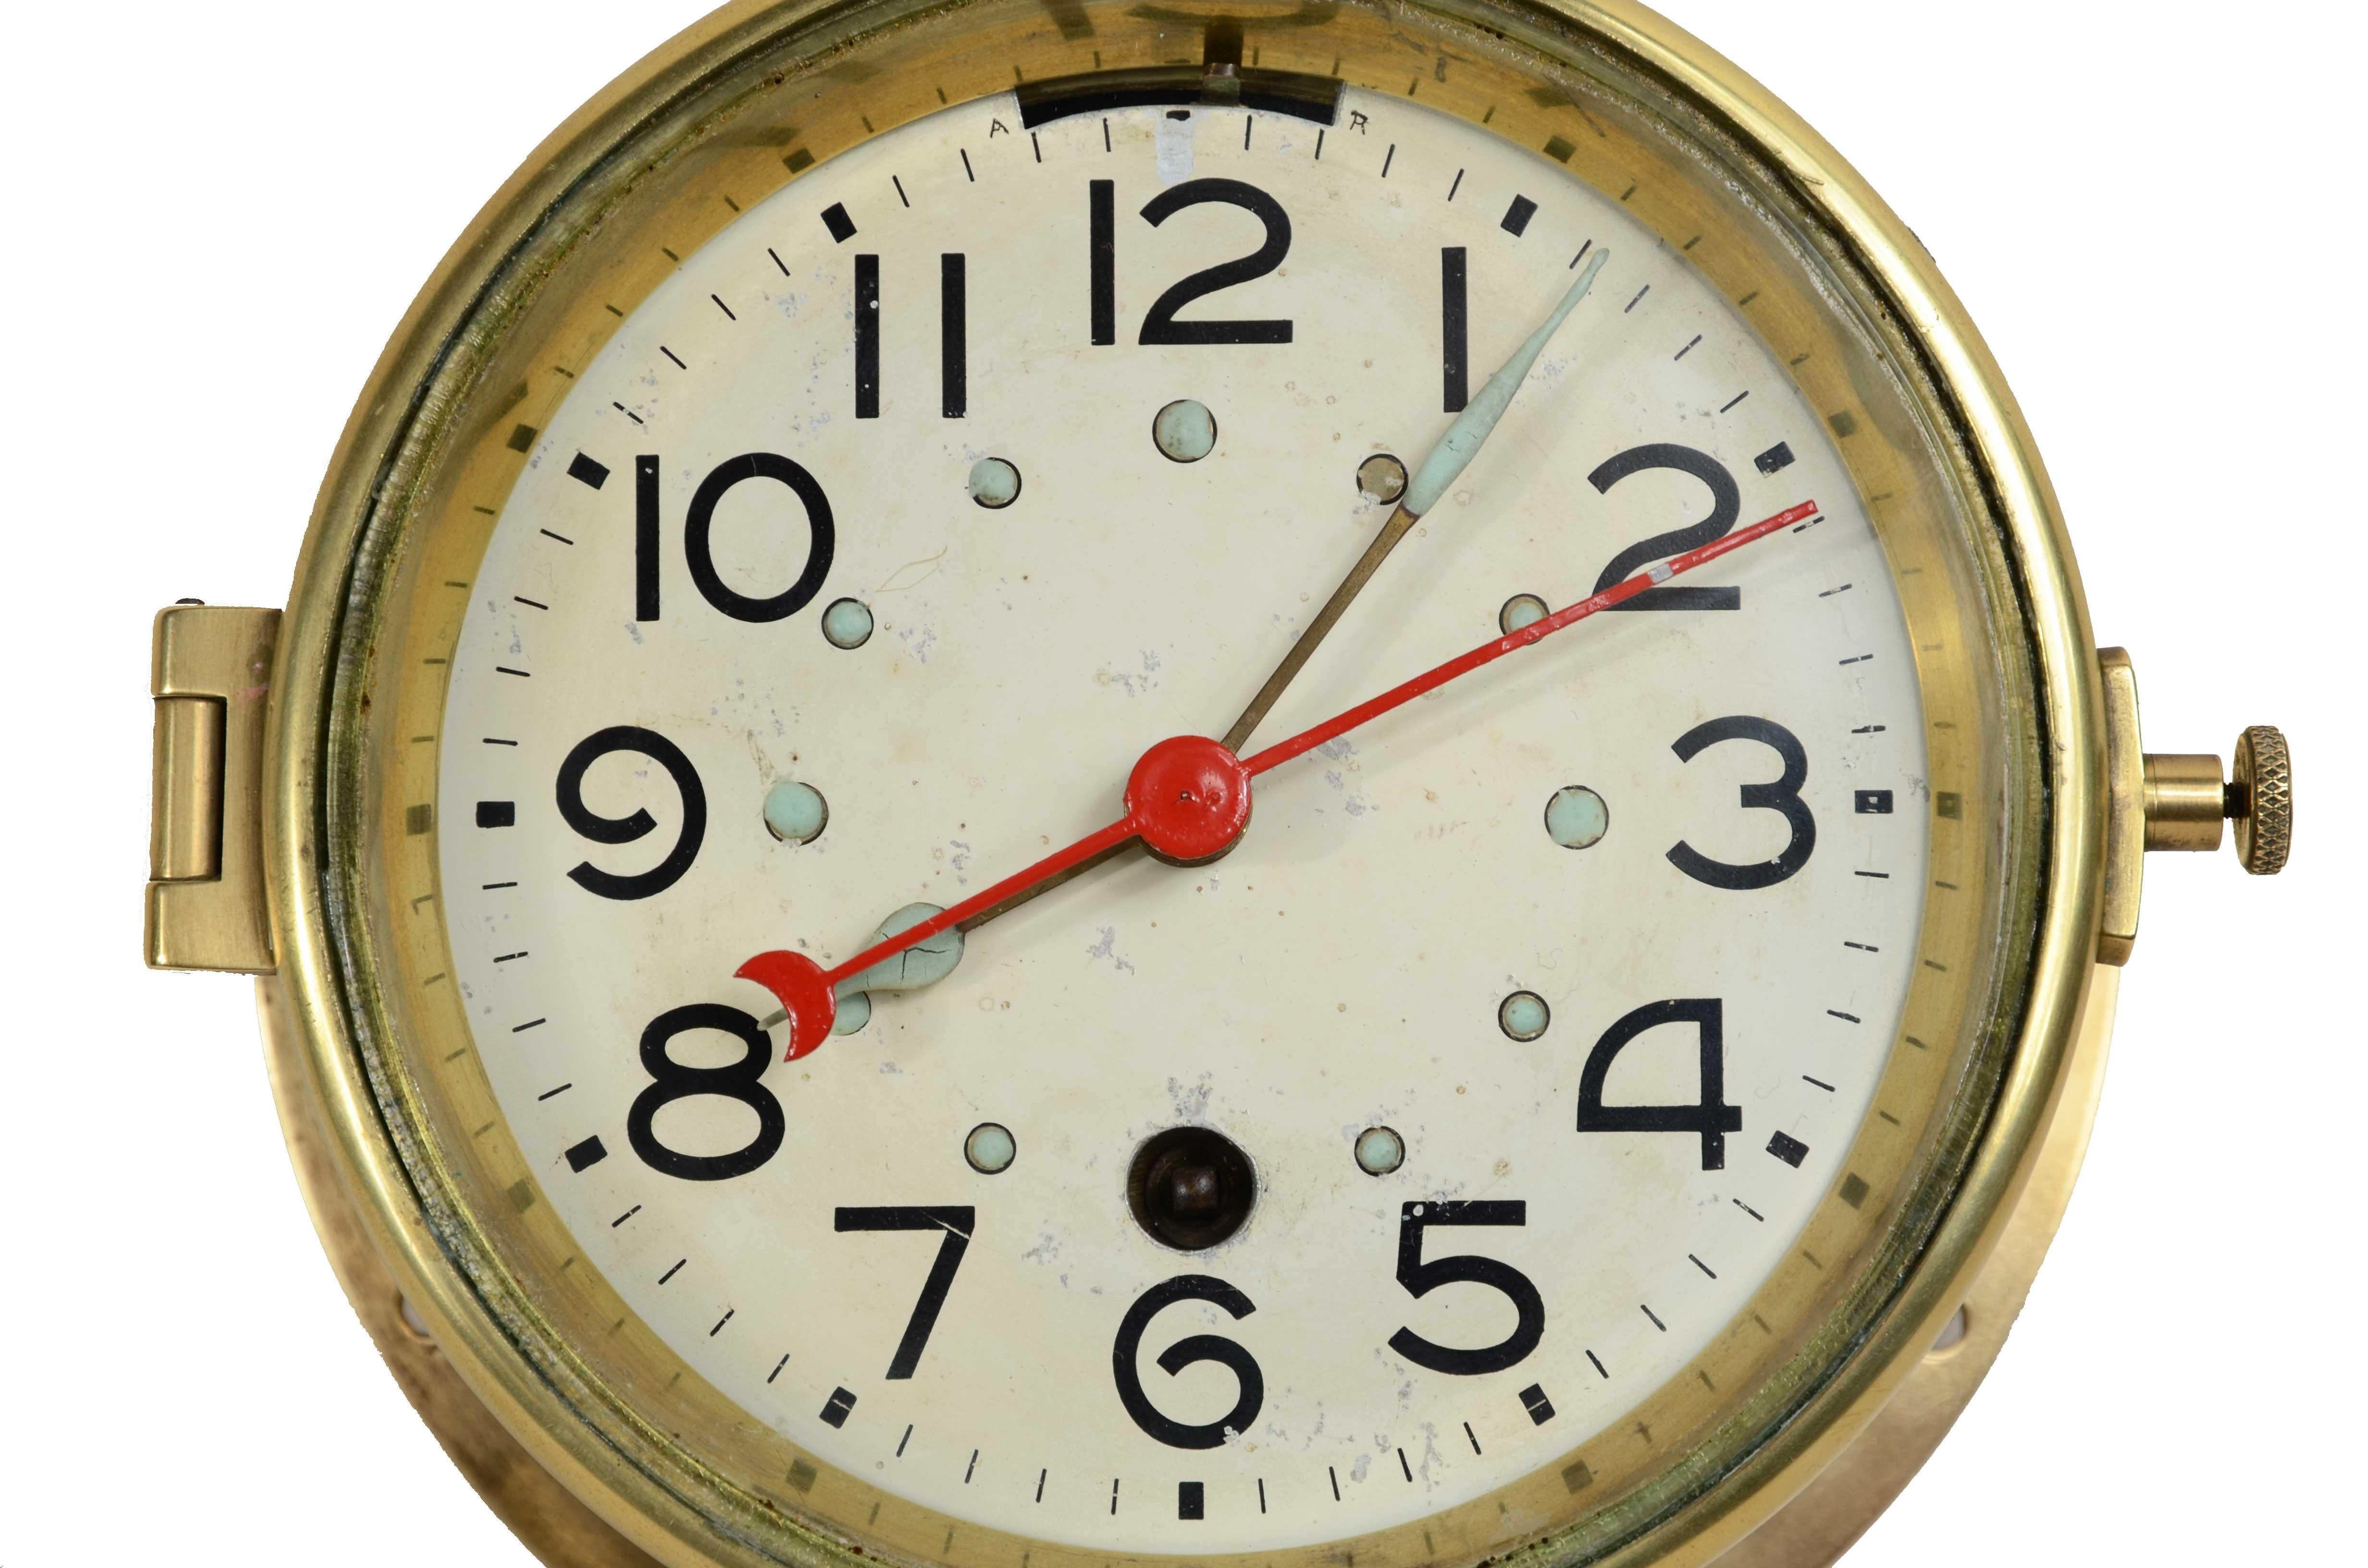 Nautical brass wall clock with 7-day spring winding, signed S. Marti Montbeliard  Grand Prix  Paris 1931, Samuel Marti was a renowned 19th century Parisian watchmaker . Diameter cm 16.8 - inches 6.7, depth cm 7.5 - inches 2.8. 
Overhauled and fully